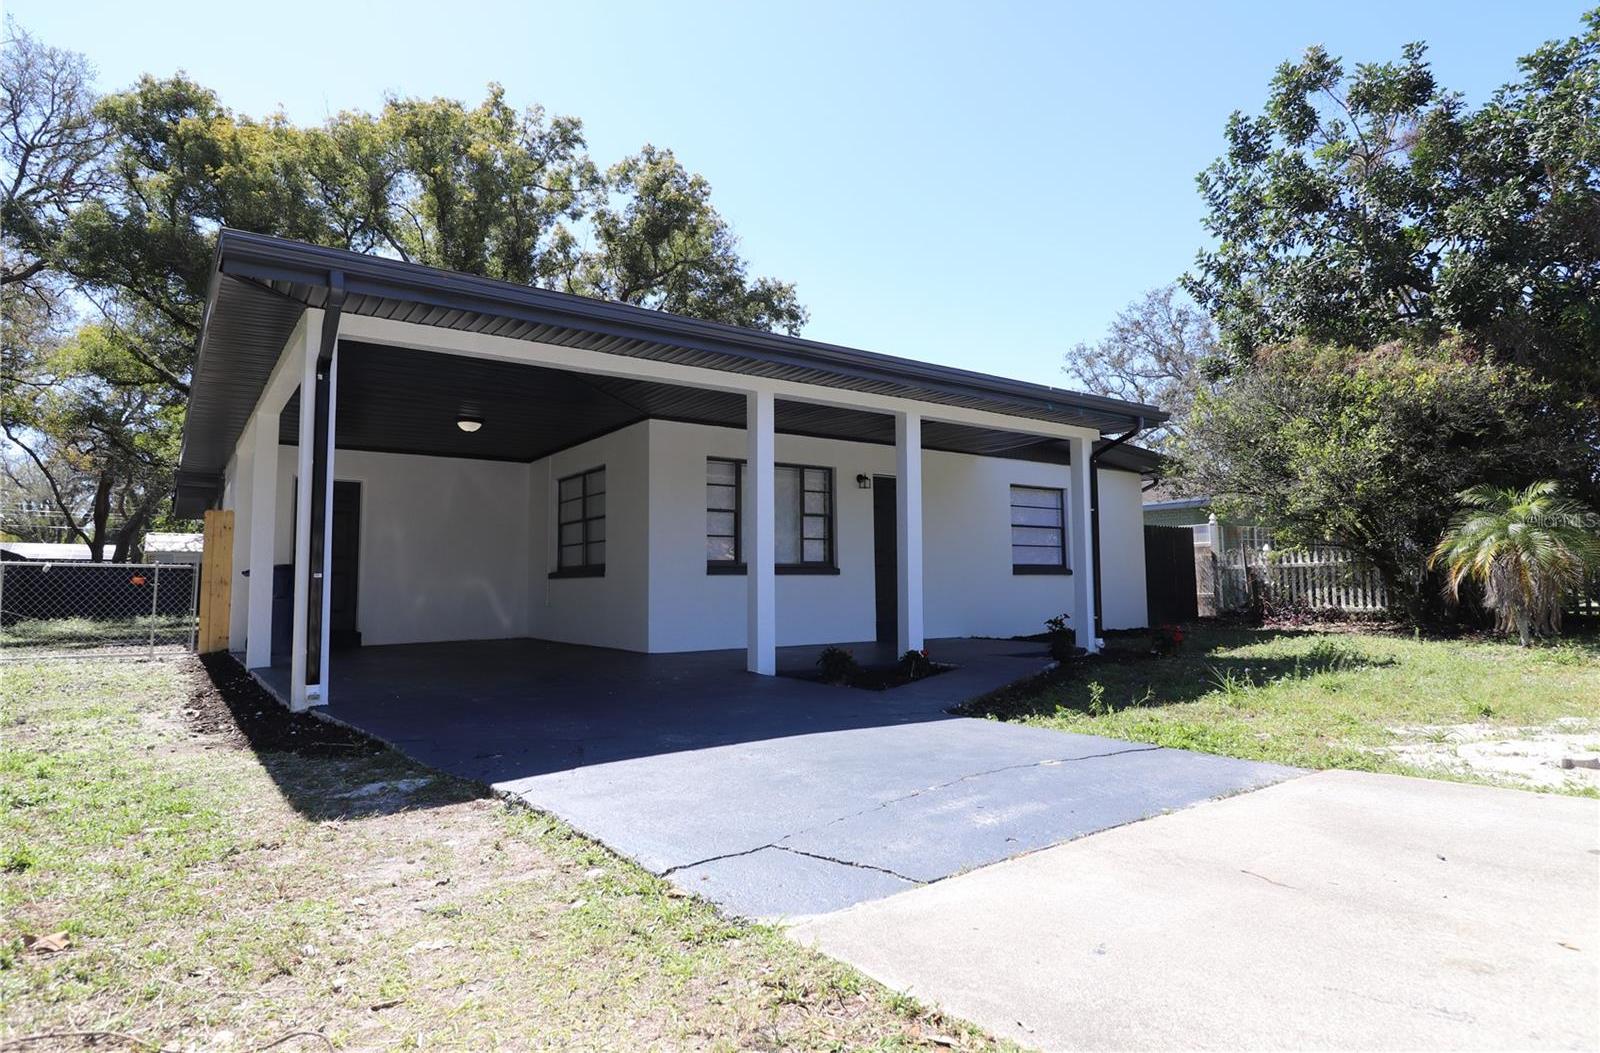 Photo one of 807 E Linebaugh Ave Tampa FL 33612 | MLS T3505667